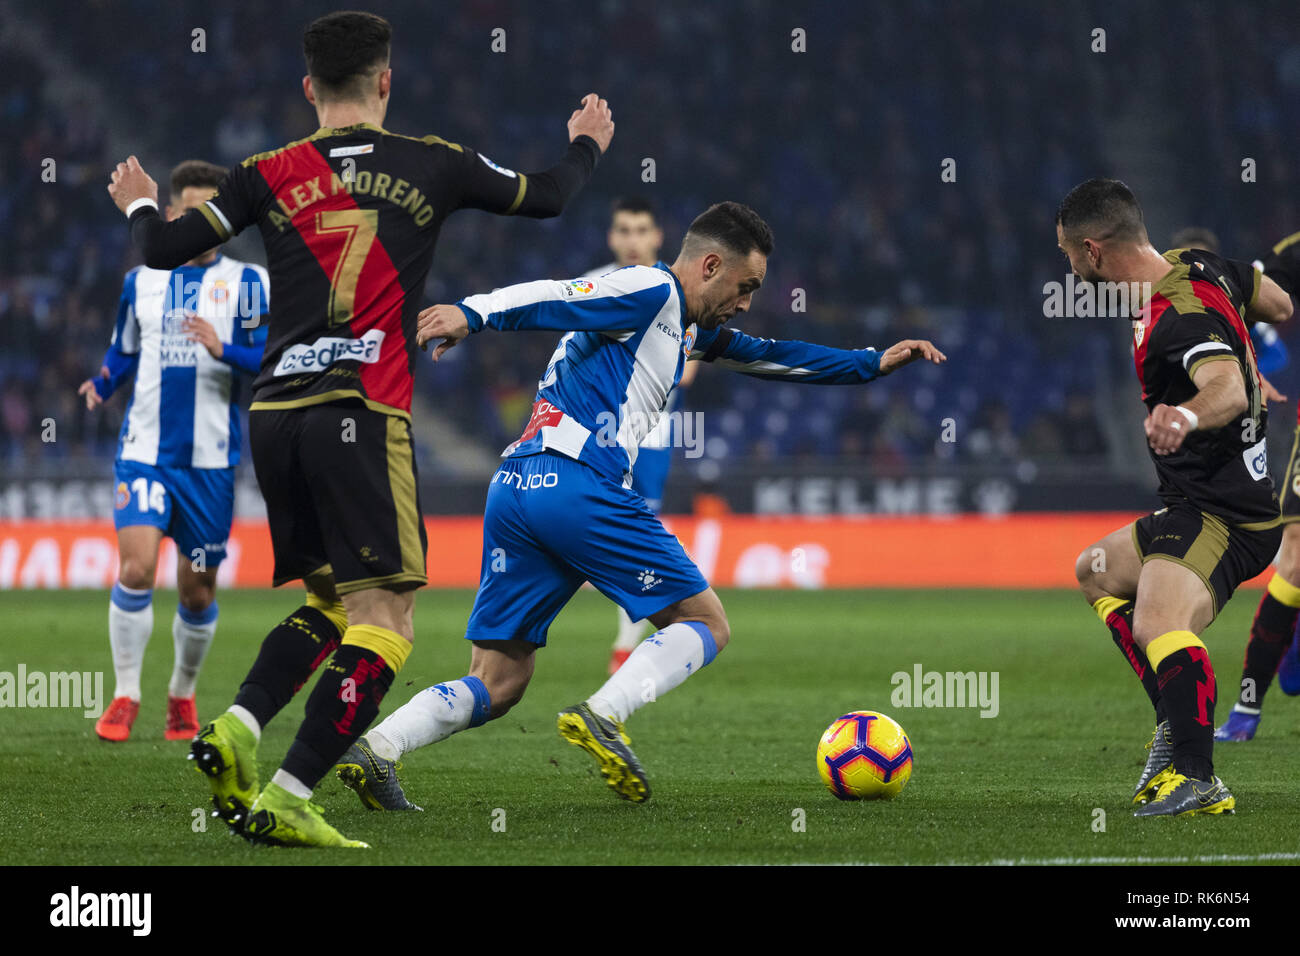 Barcelona, Spain. 9th Feb, 2019. RCD Espanyol's Sergio Garcia (2nd R) competes during a Spanish league match between RCD Espanyol and Rayo Vallecano in Barcelona, Spain, on Feb. 9, 2019. RCD Espanyol won 2-1. Credit: Joan Gosa/Xinhua/Alamy Live News Stock Photo